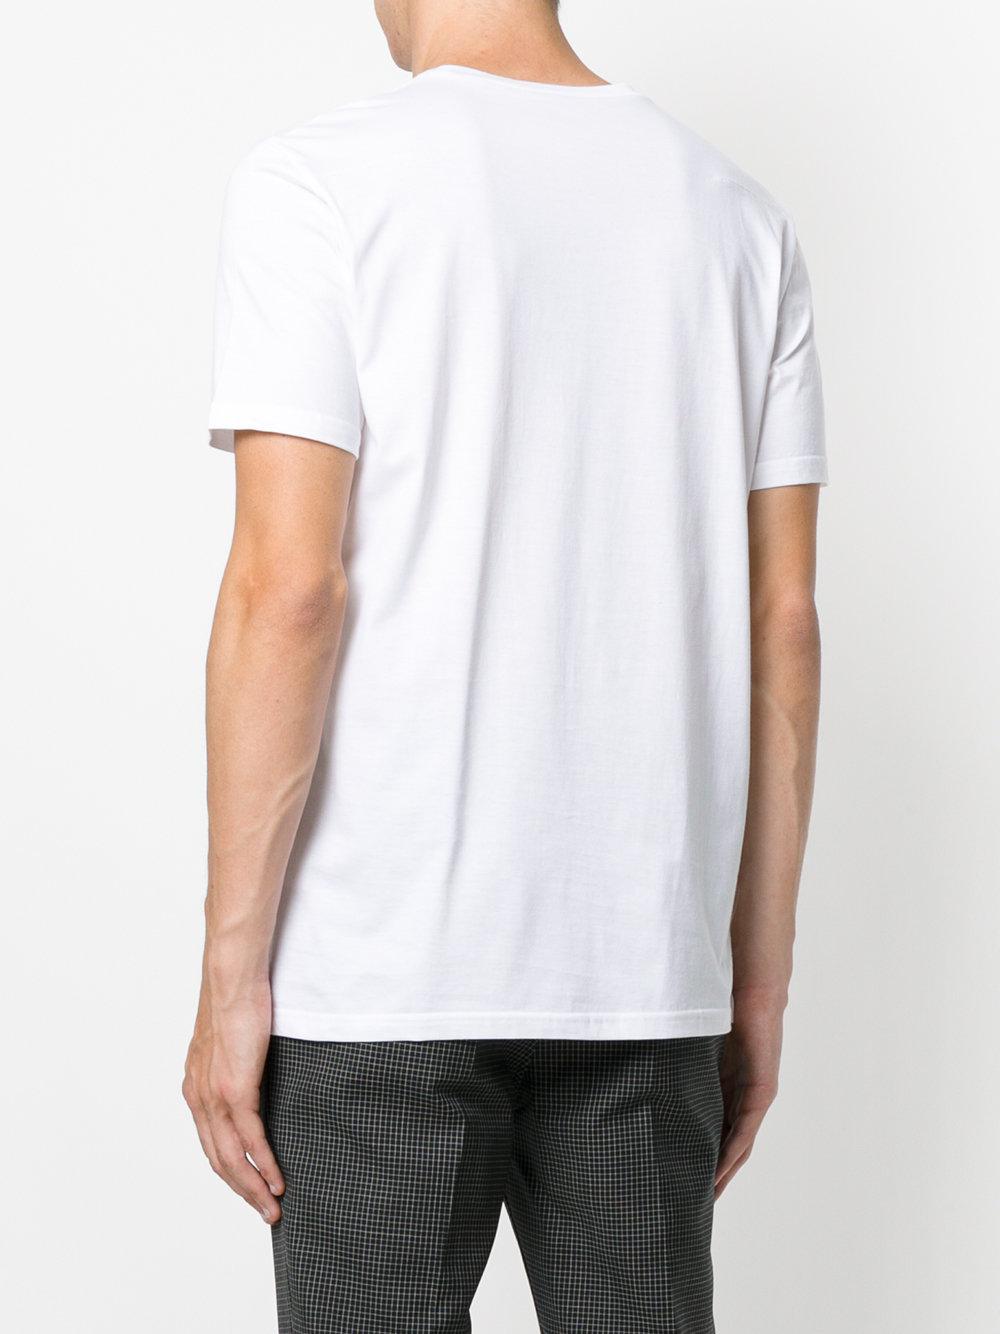 Lyst - Dior Homme Insect Embroidery T-shirt in White for Men